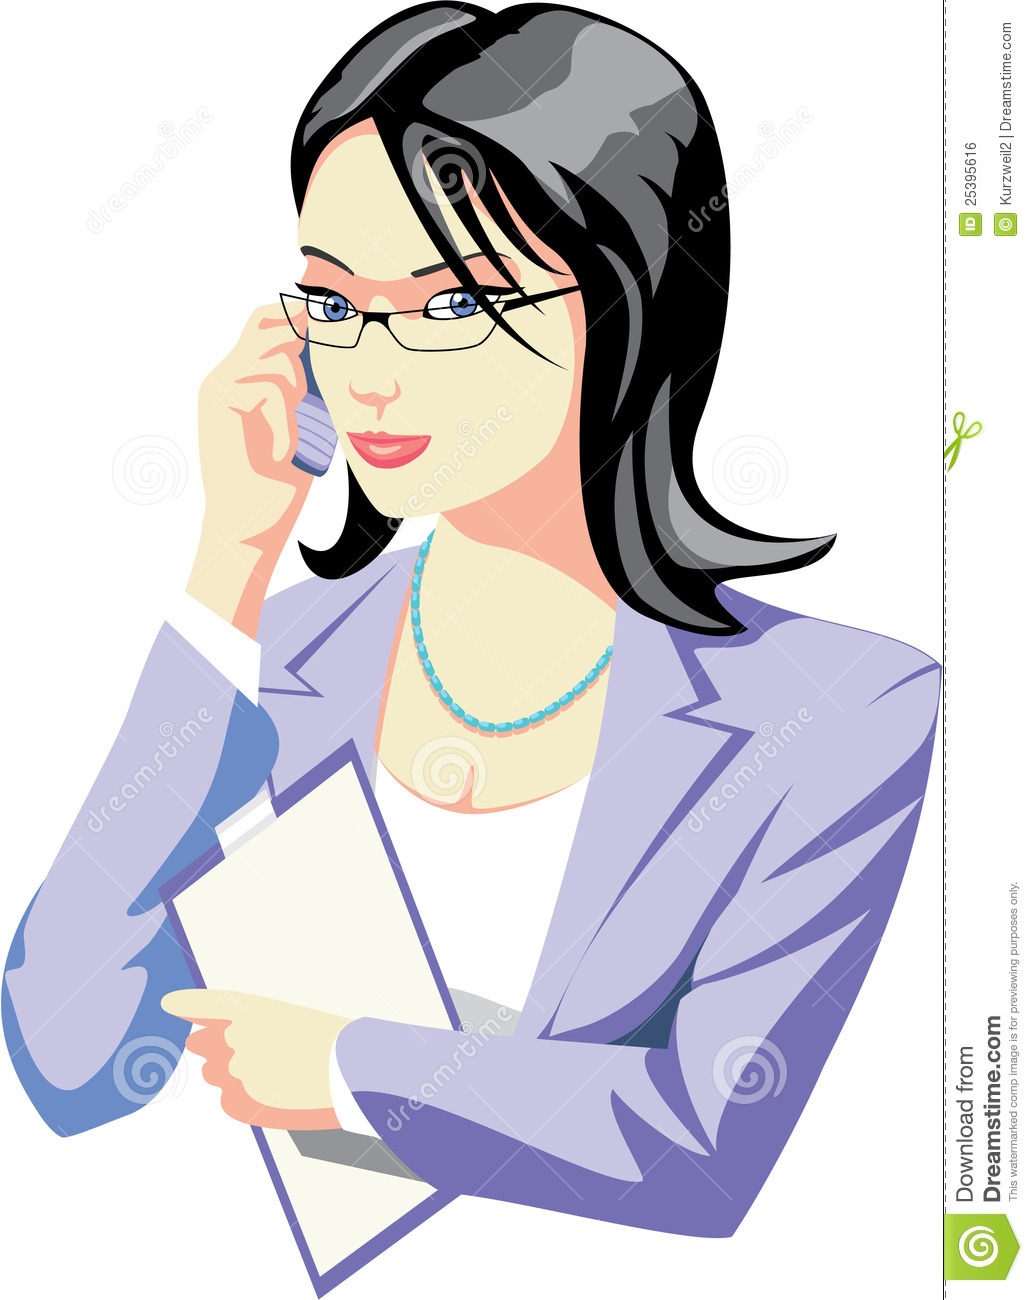 manager clipart assistant manager